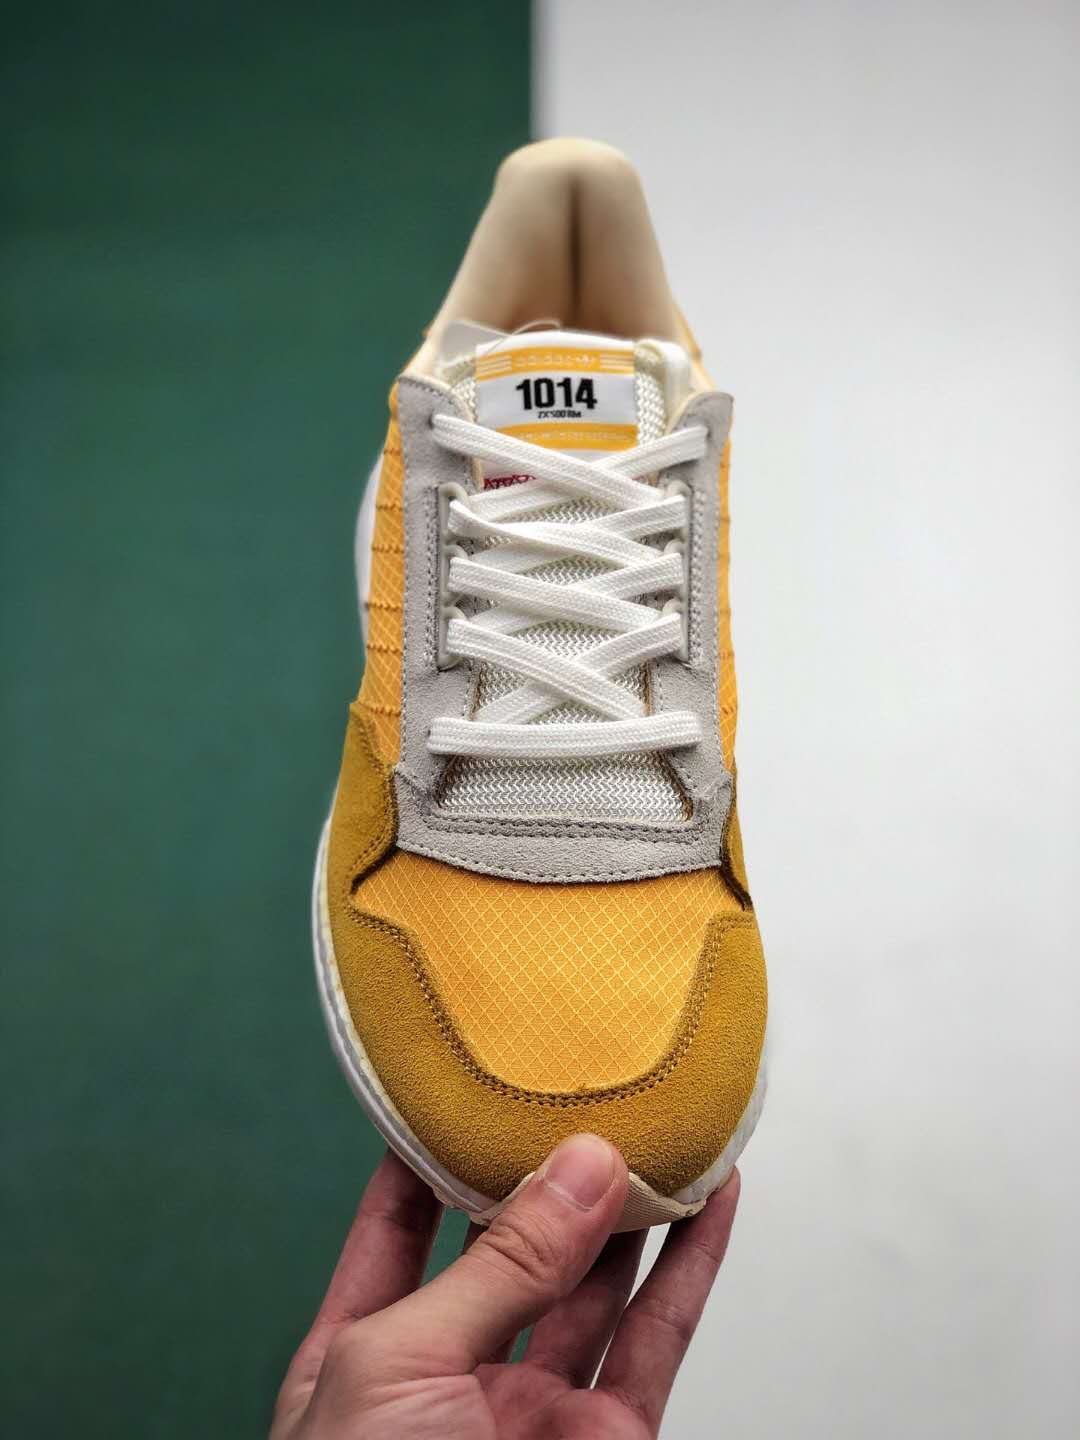 Adidas originals ZX 500 RM 'Bold Gold' CG6860 - Stand out with style!